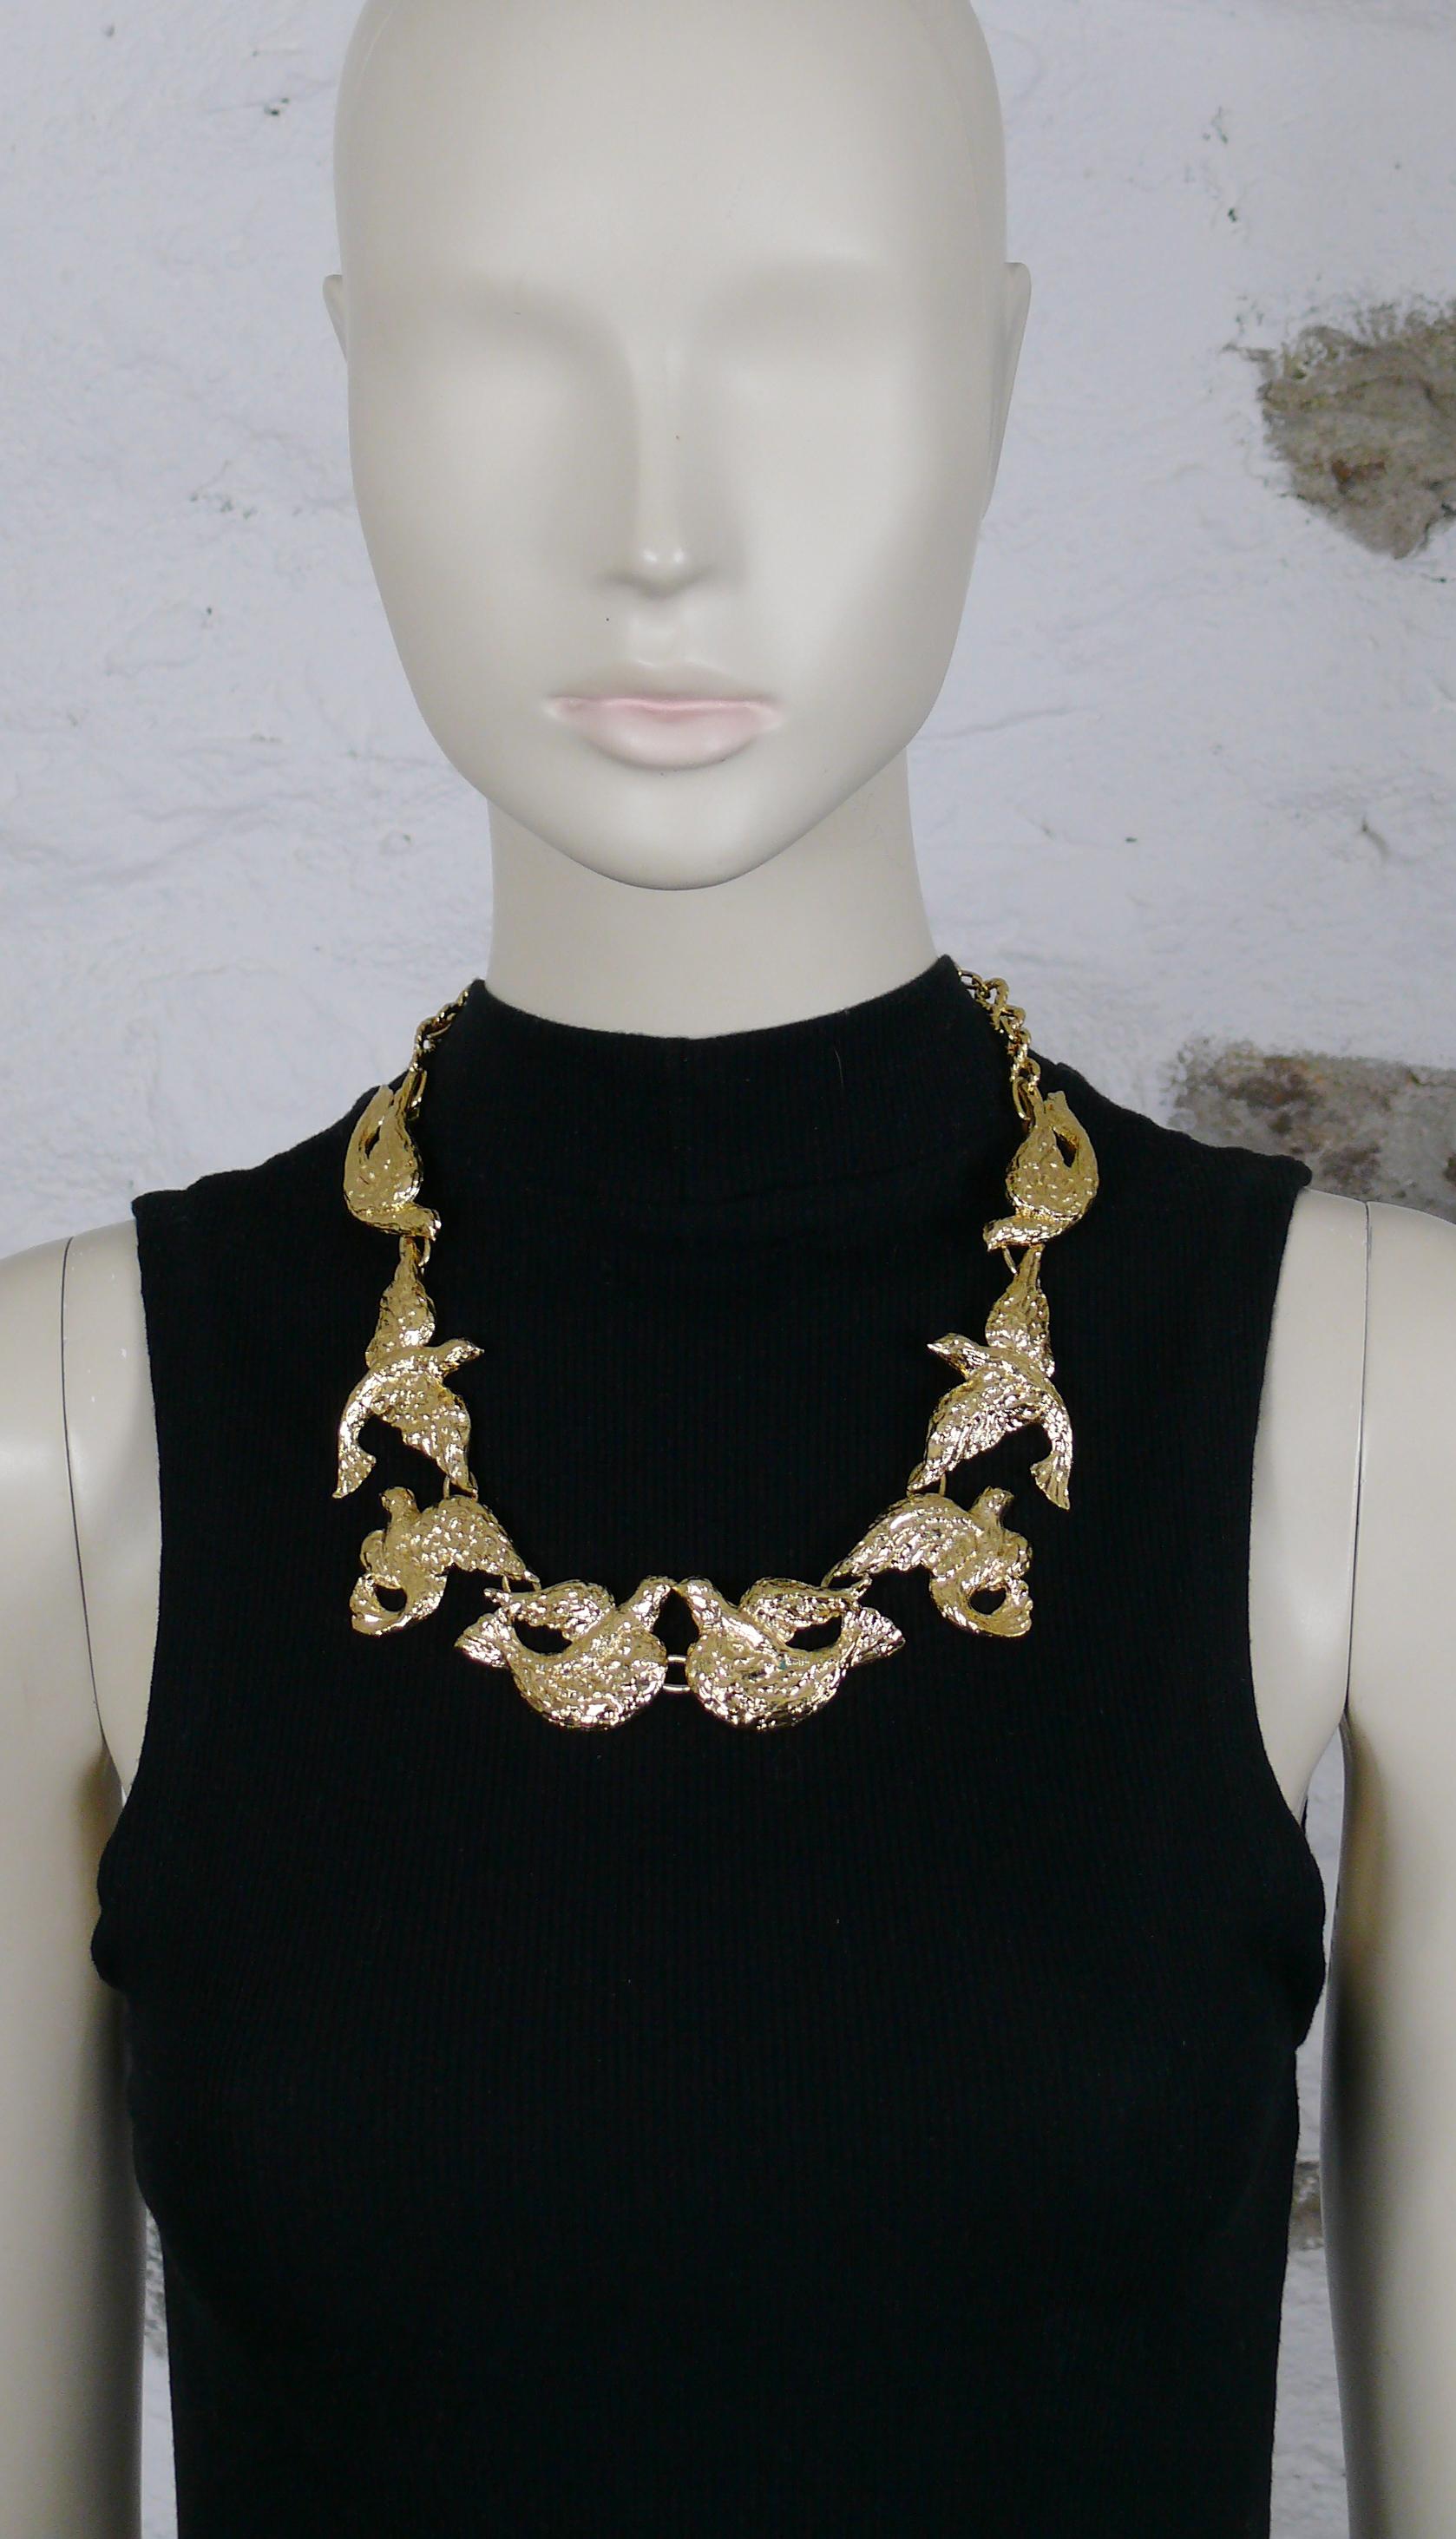 YVES SAINT LAURENT vintage gold toned necklace featuring bird links.

Adjustable hook clasp closure.

Embossed YSL Made in France.

Indicative measurements : adjustable length from approx. 49 cm (19.29 inches) to approx. 54 cm (21.26